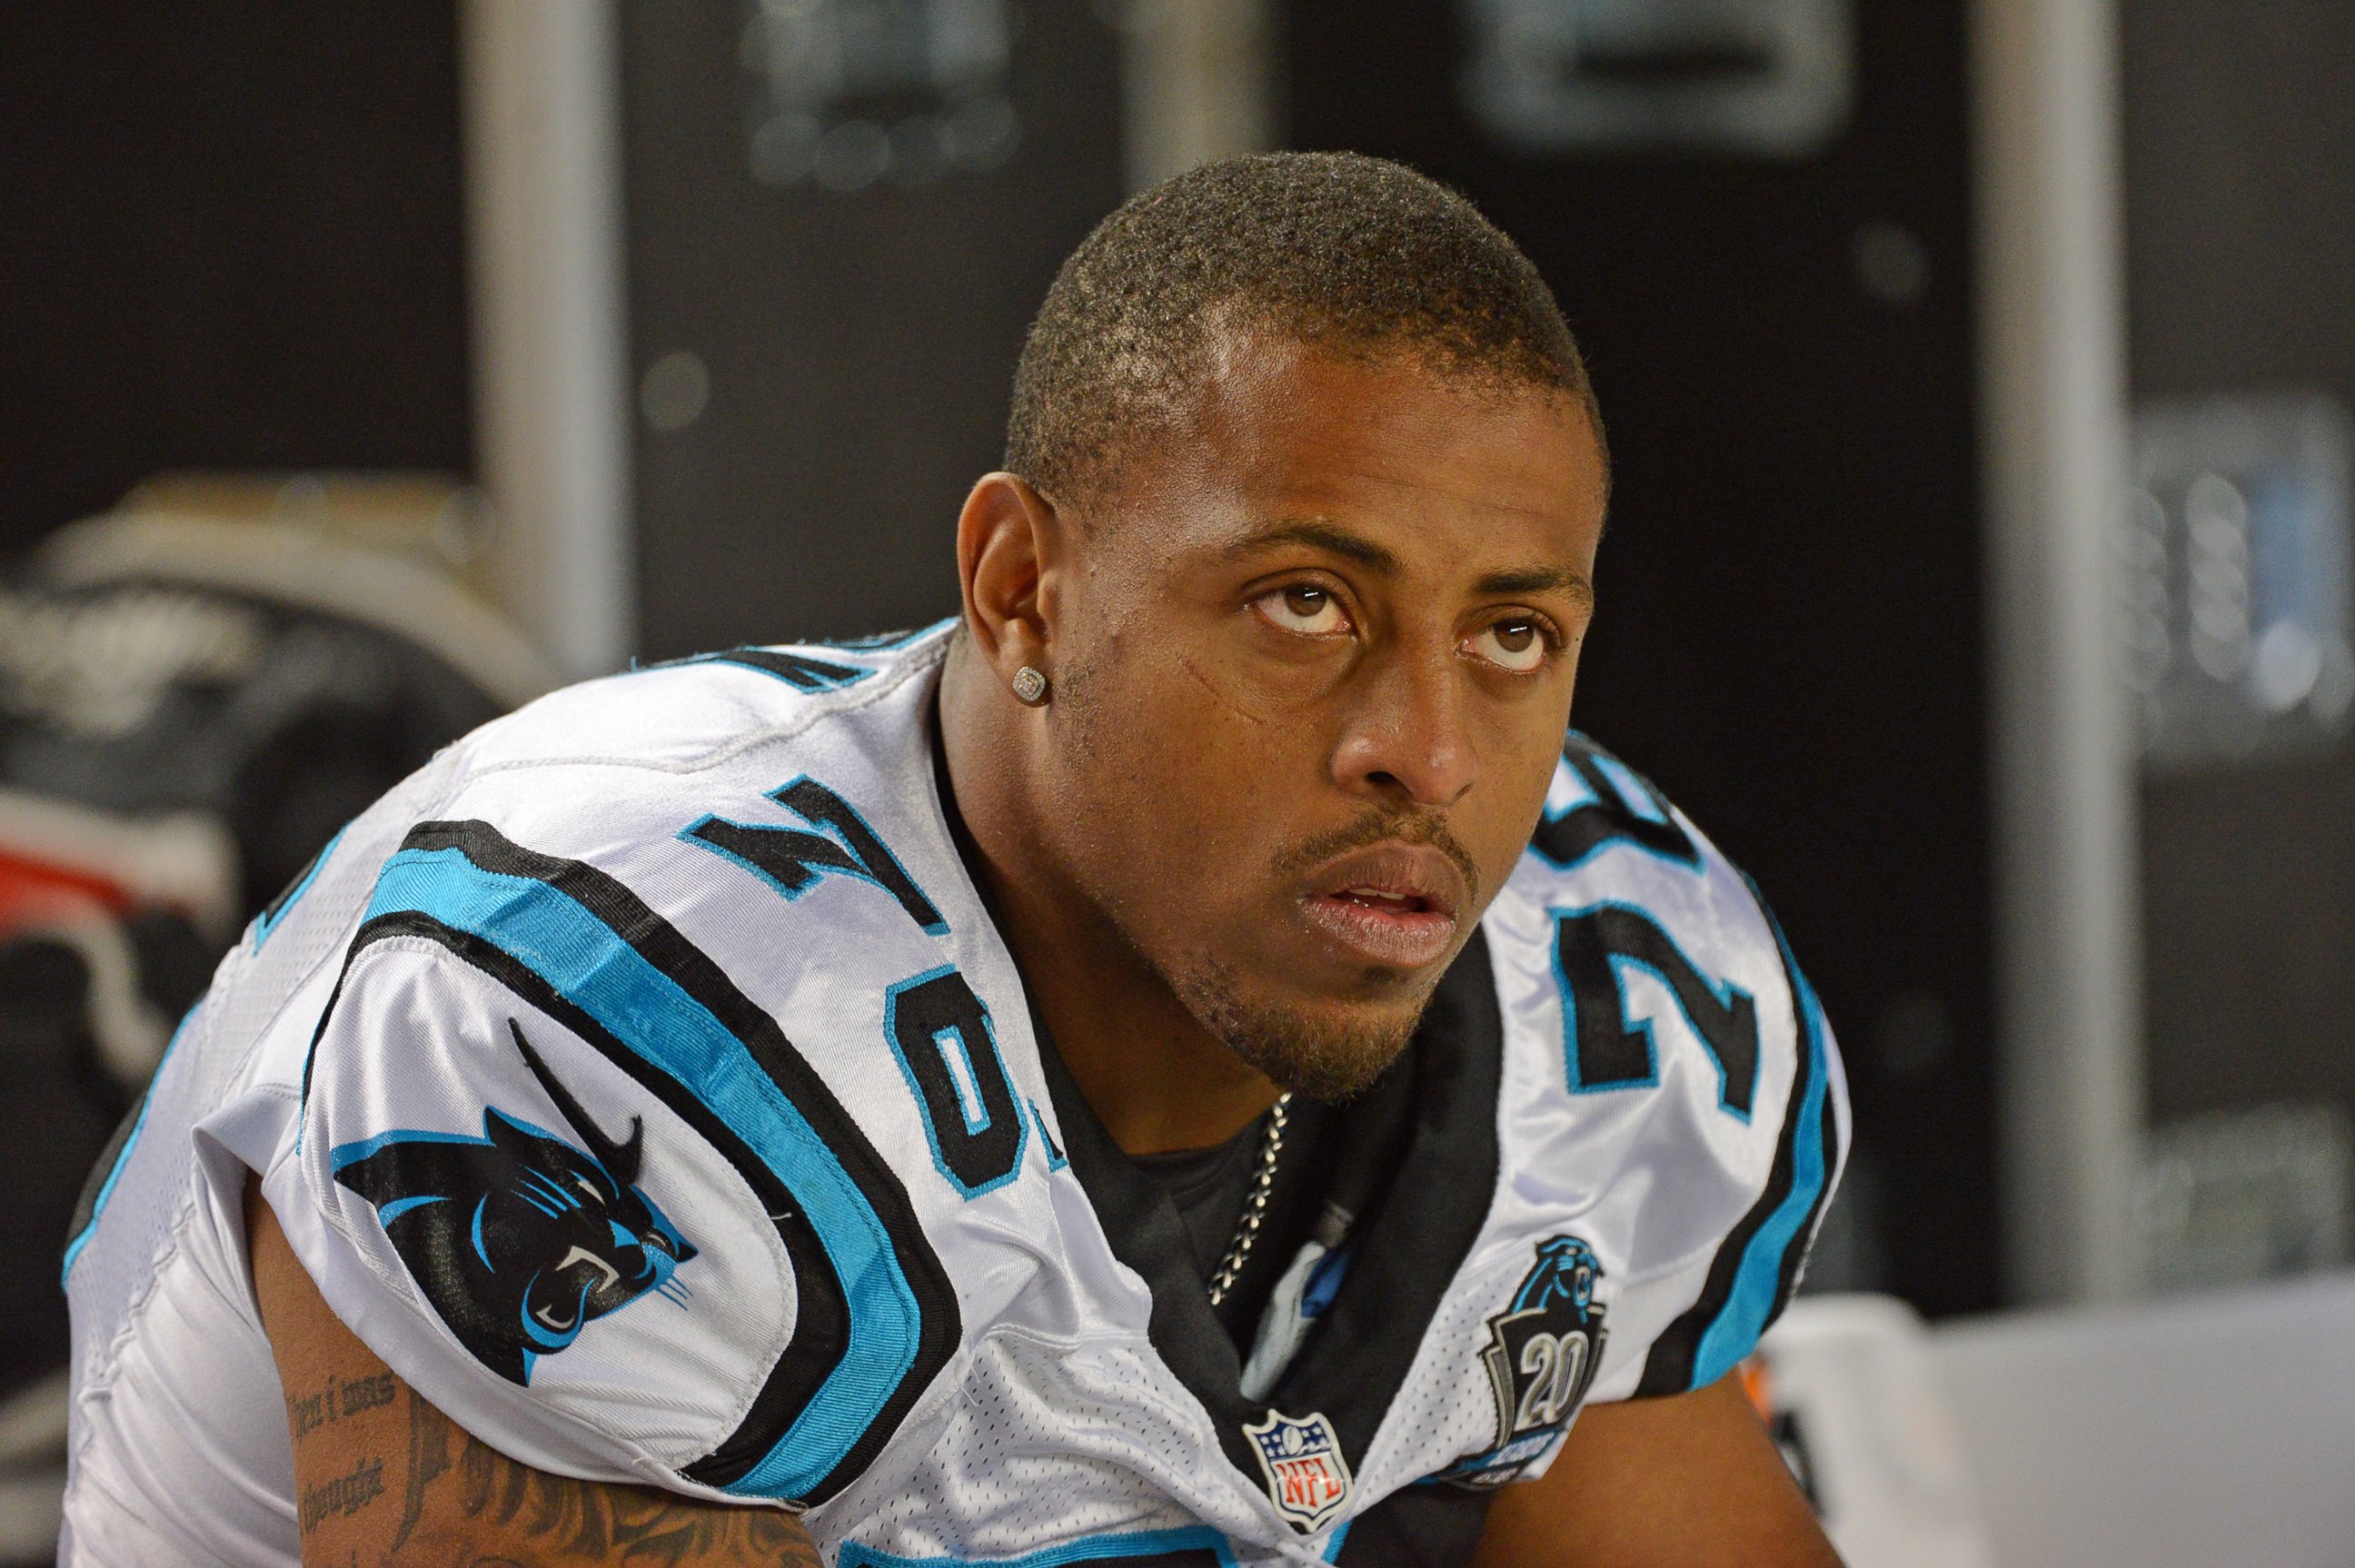 PHOTO: Defensive lineman Greg Hardy #76 of the Carolina Panthers looks on from the sideline during a preseason game against the Pittsburgh Steelers at Heinz Field on August 28, 2014 in Pittsburgh, Pa.